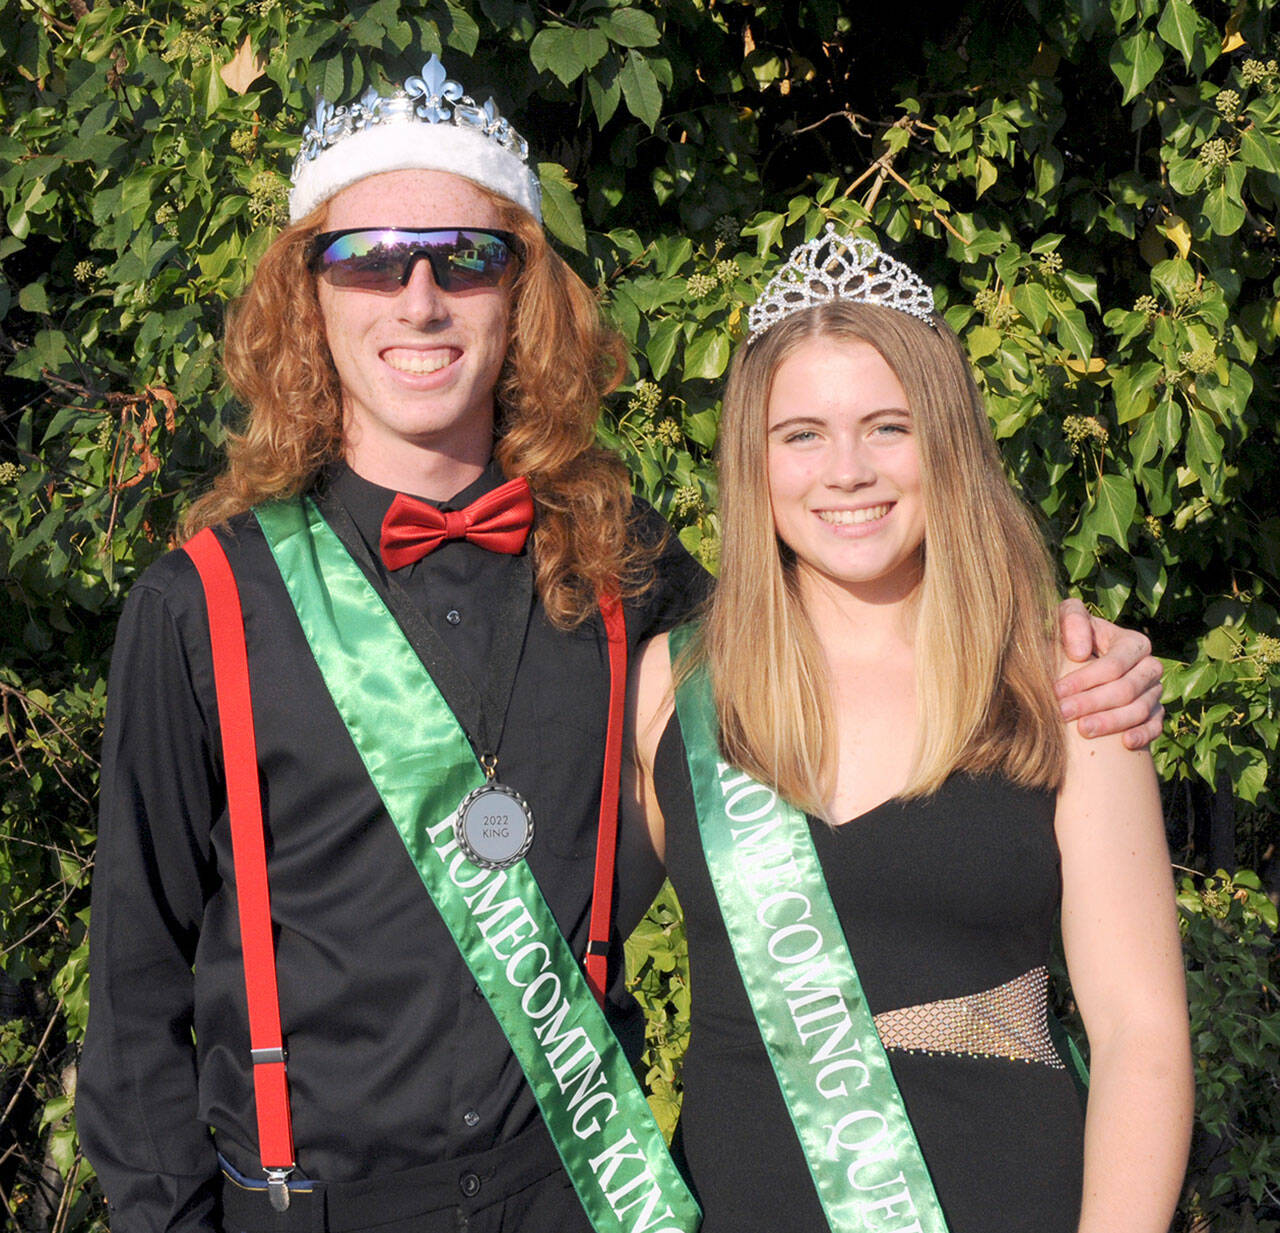 Port Angeles High School senior homecoming King and Queen Jack Gladfelter and Lily Halberg prepare to ride in their school’s homecoming parade after being crowned on Friday. The pair presided over the Port Angeles Roughriders’ 28-9 loss to the Bremerton Knights during Friday’s football game at Port Angeles Civic Field. (Keith Thorpe/Peninsula Daily News)